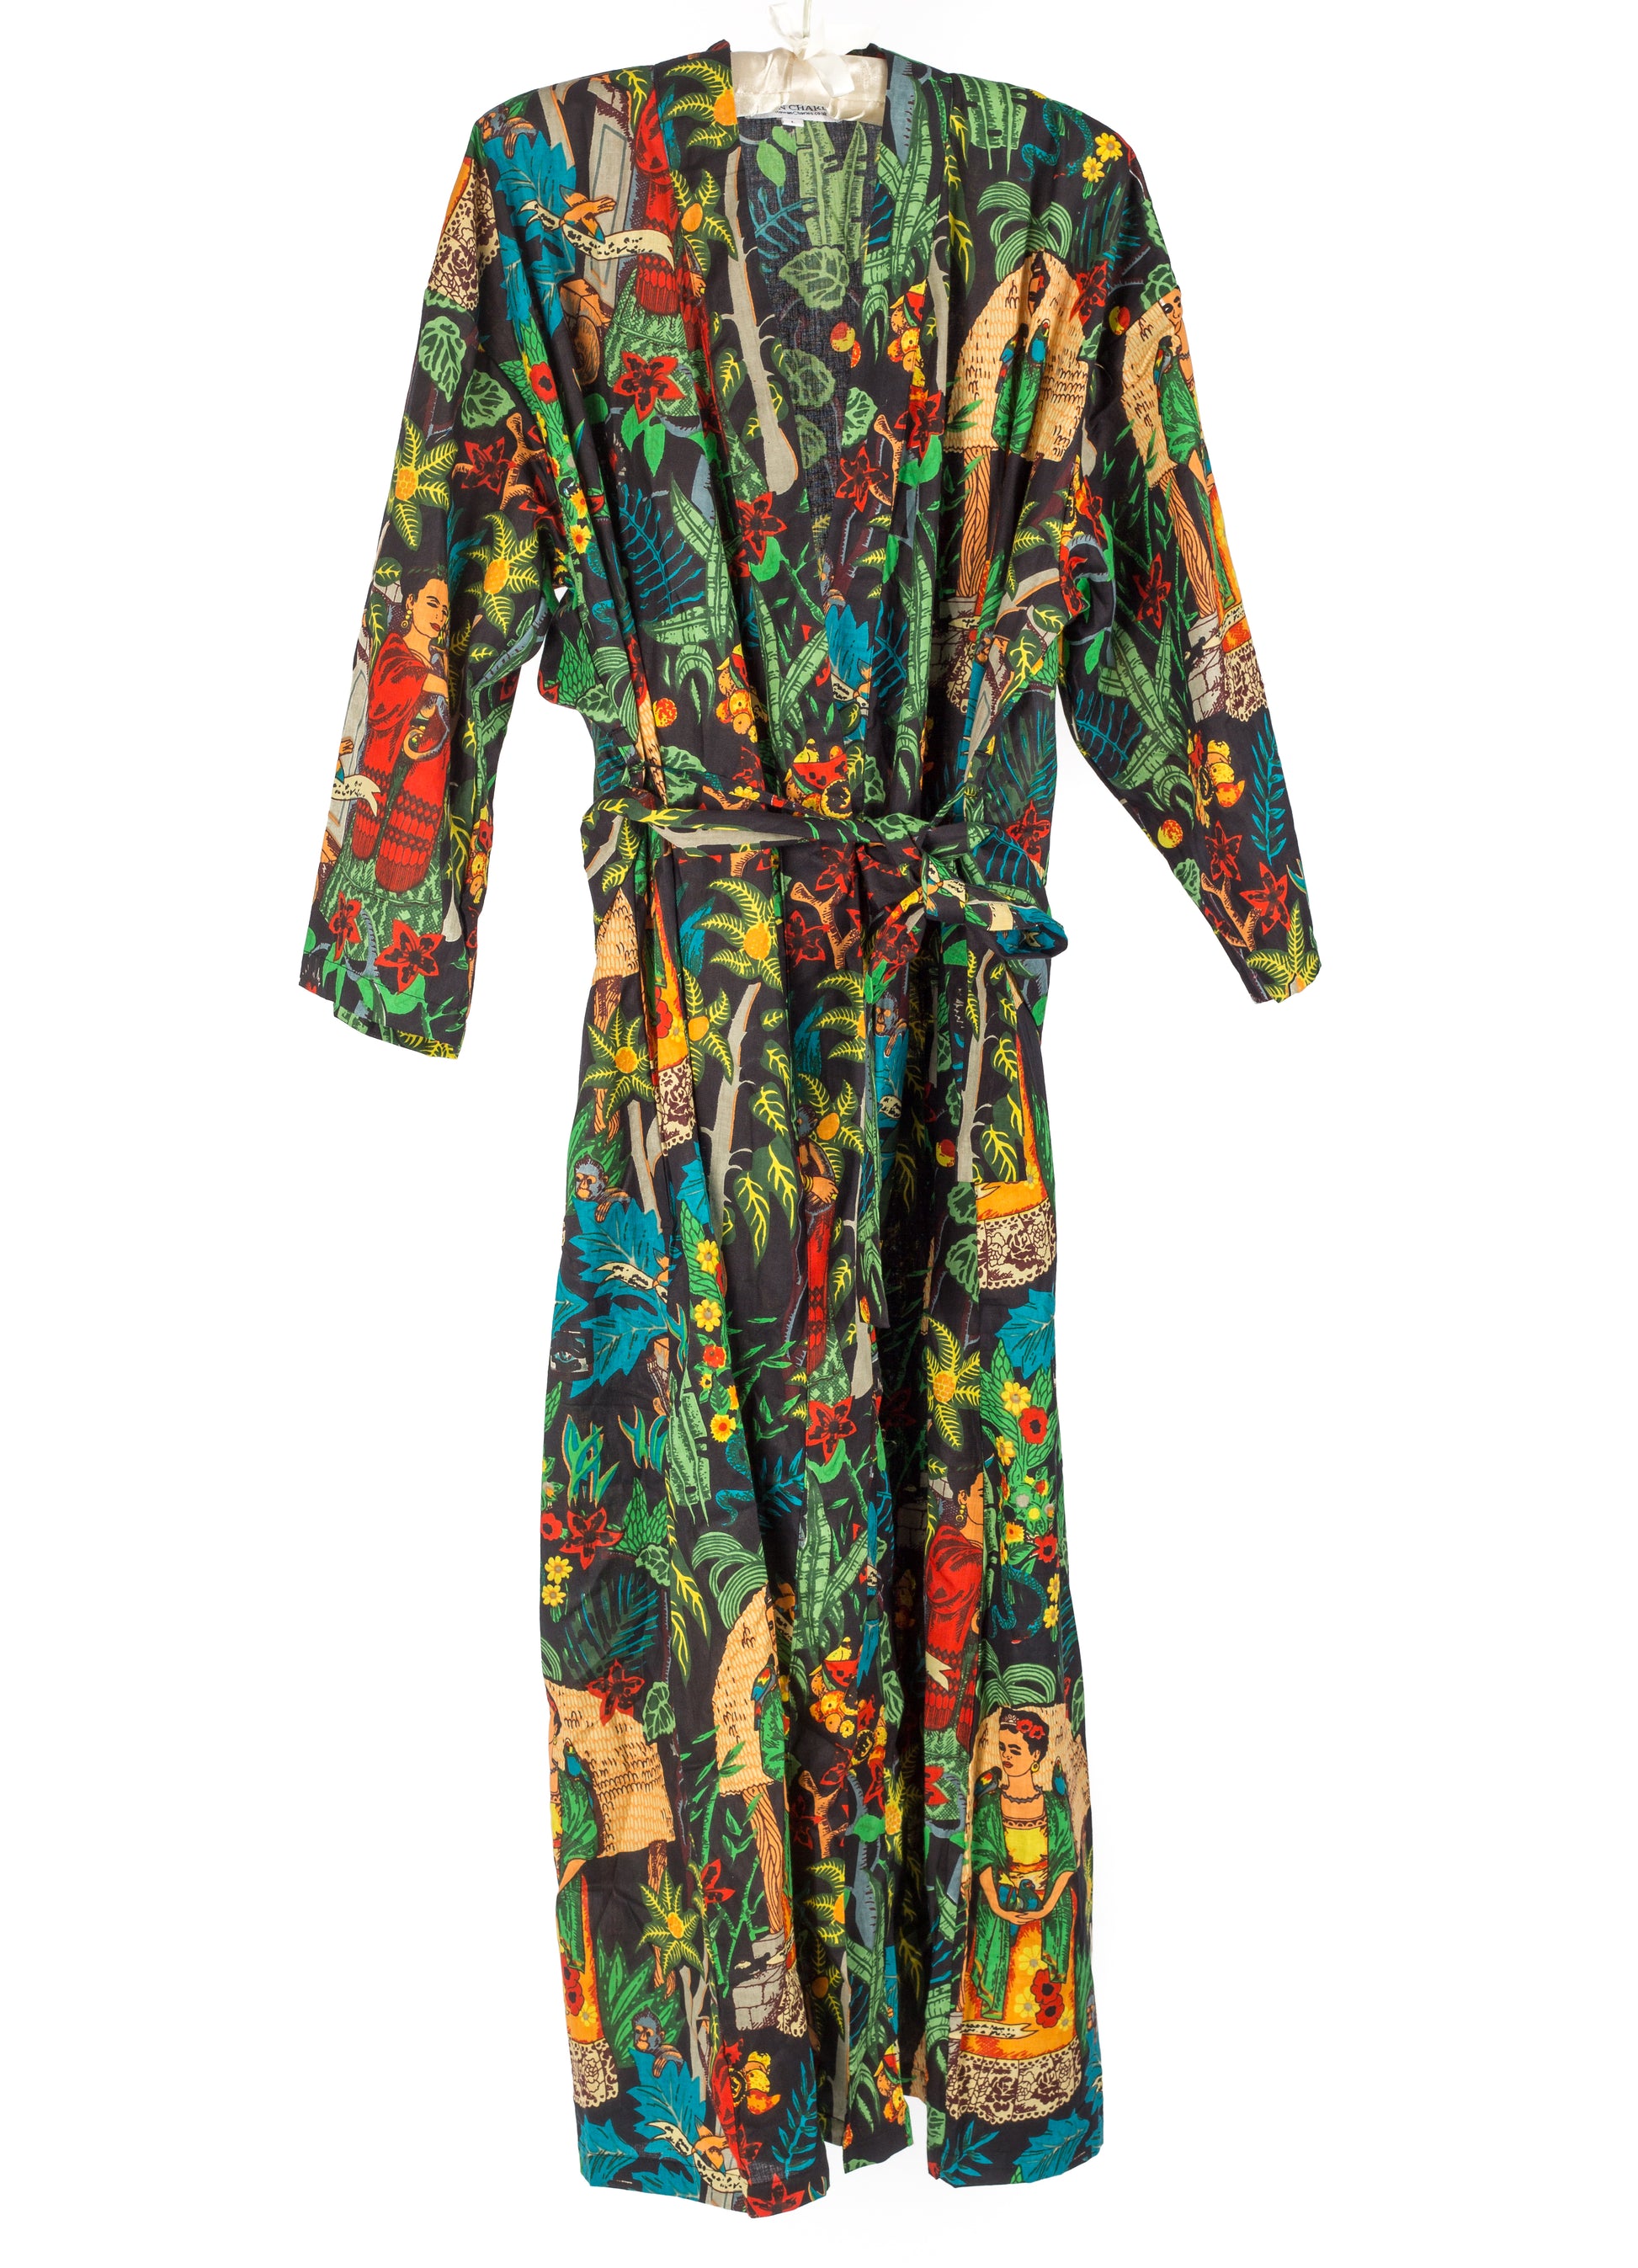 Frida.100% cotton kimono style dressing gown. Black background but printed vibrant colours. Whacky design. Monkeys, parrots, and Frida Kahlo, the iconic Mexican artist. ladies dressing gown, dressing gown for women, kimono dressing gown, colourful womens sleepwear, cotton dressing gown,